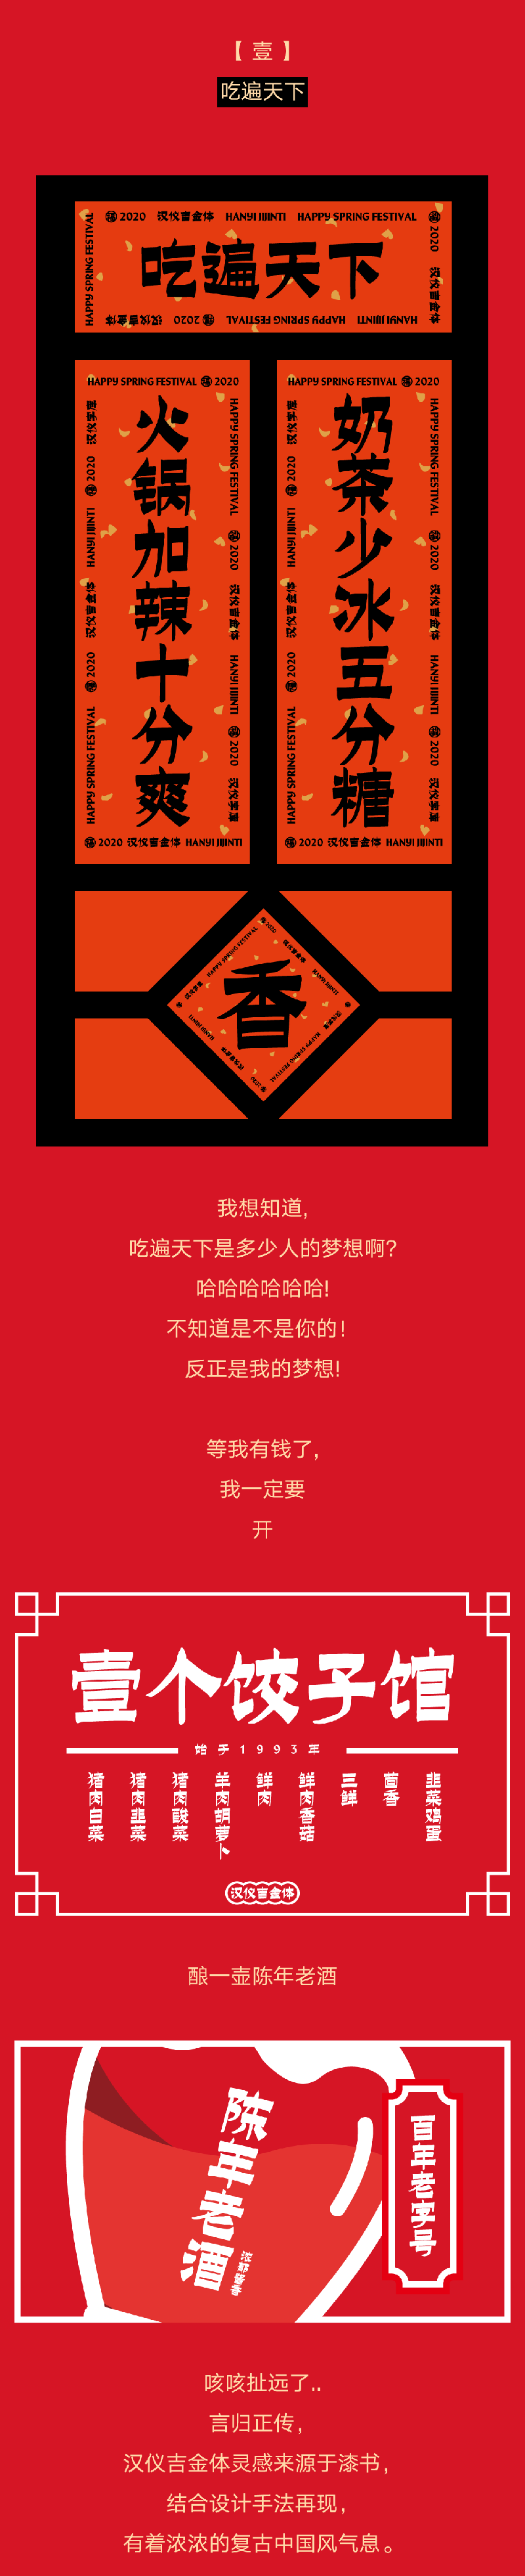 Happy Chinese font-Old Xu, do you want Chinese Spring Festival couplets